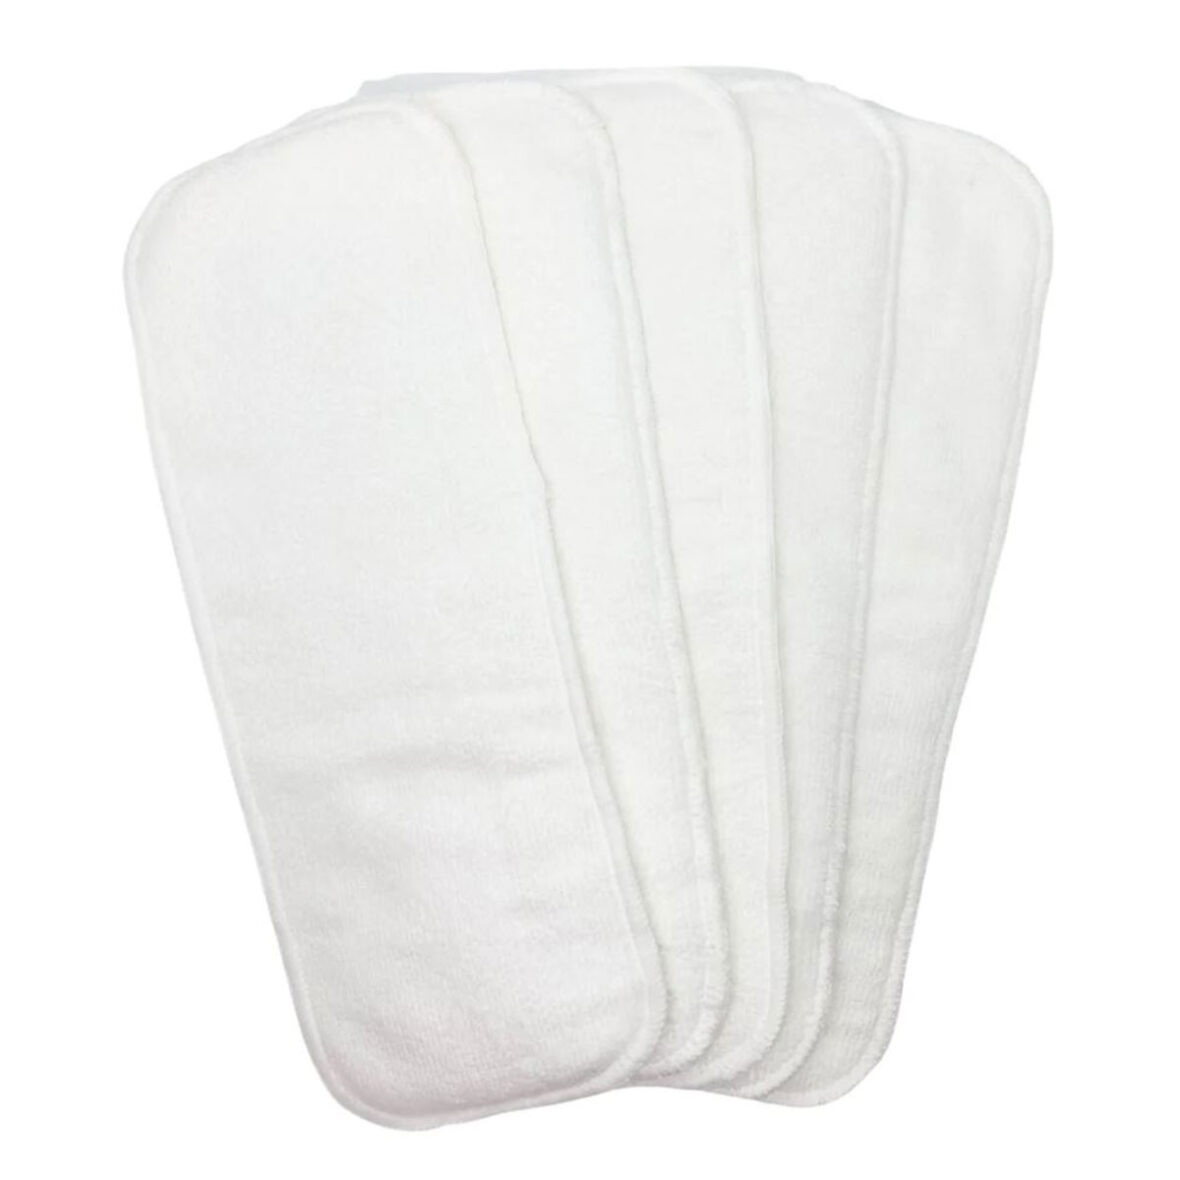 Microfiber Inserts For Cloth Diapers (5Pcs Pack)